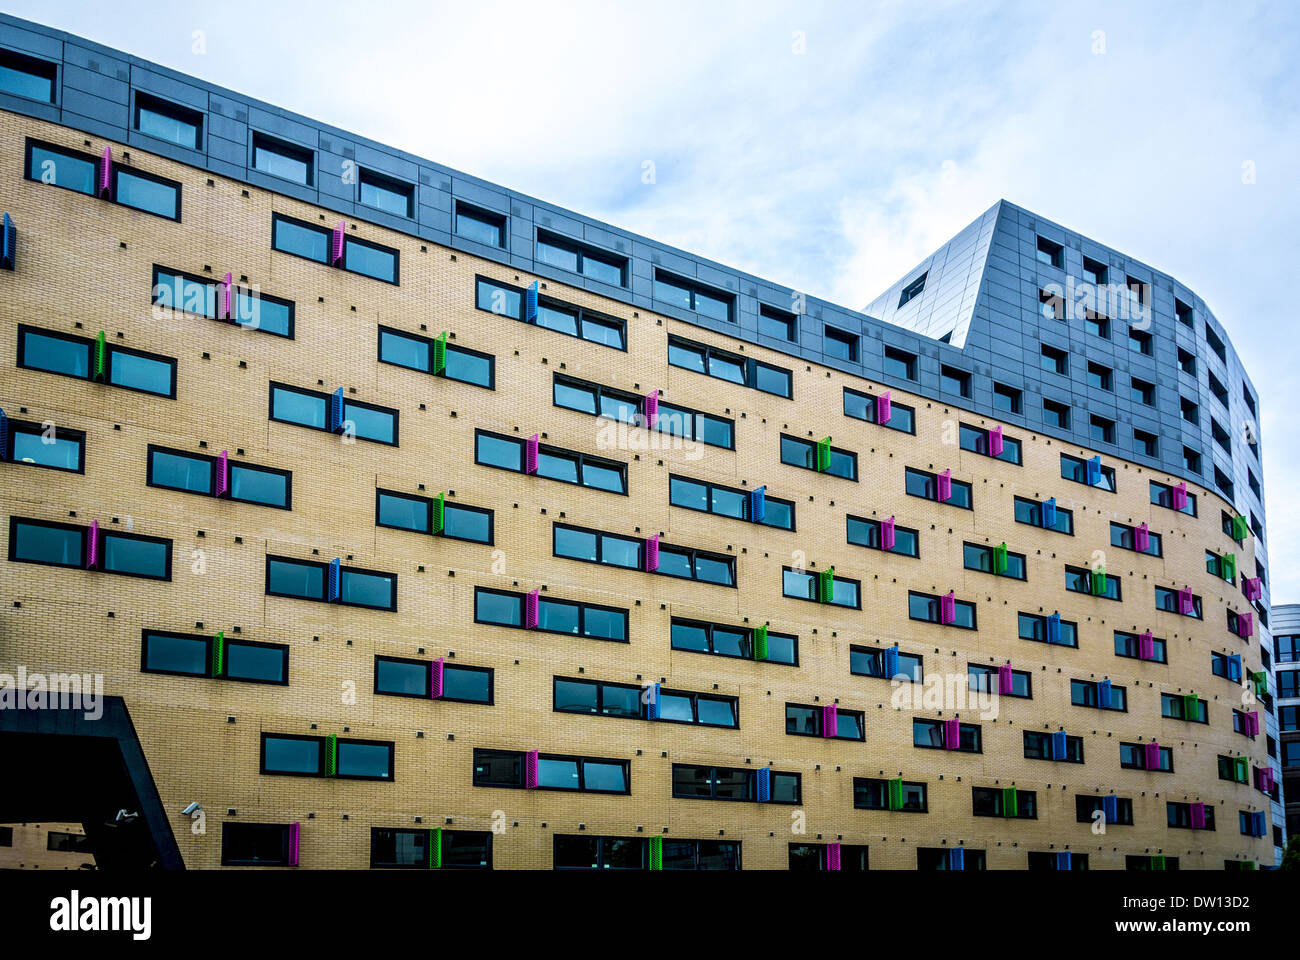 Student accommodation building in Leeds, UK. Stock Photo